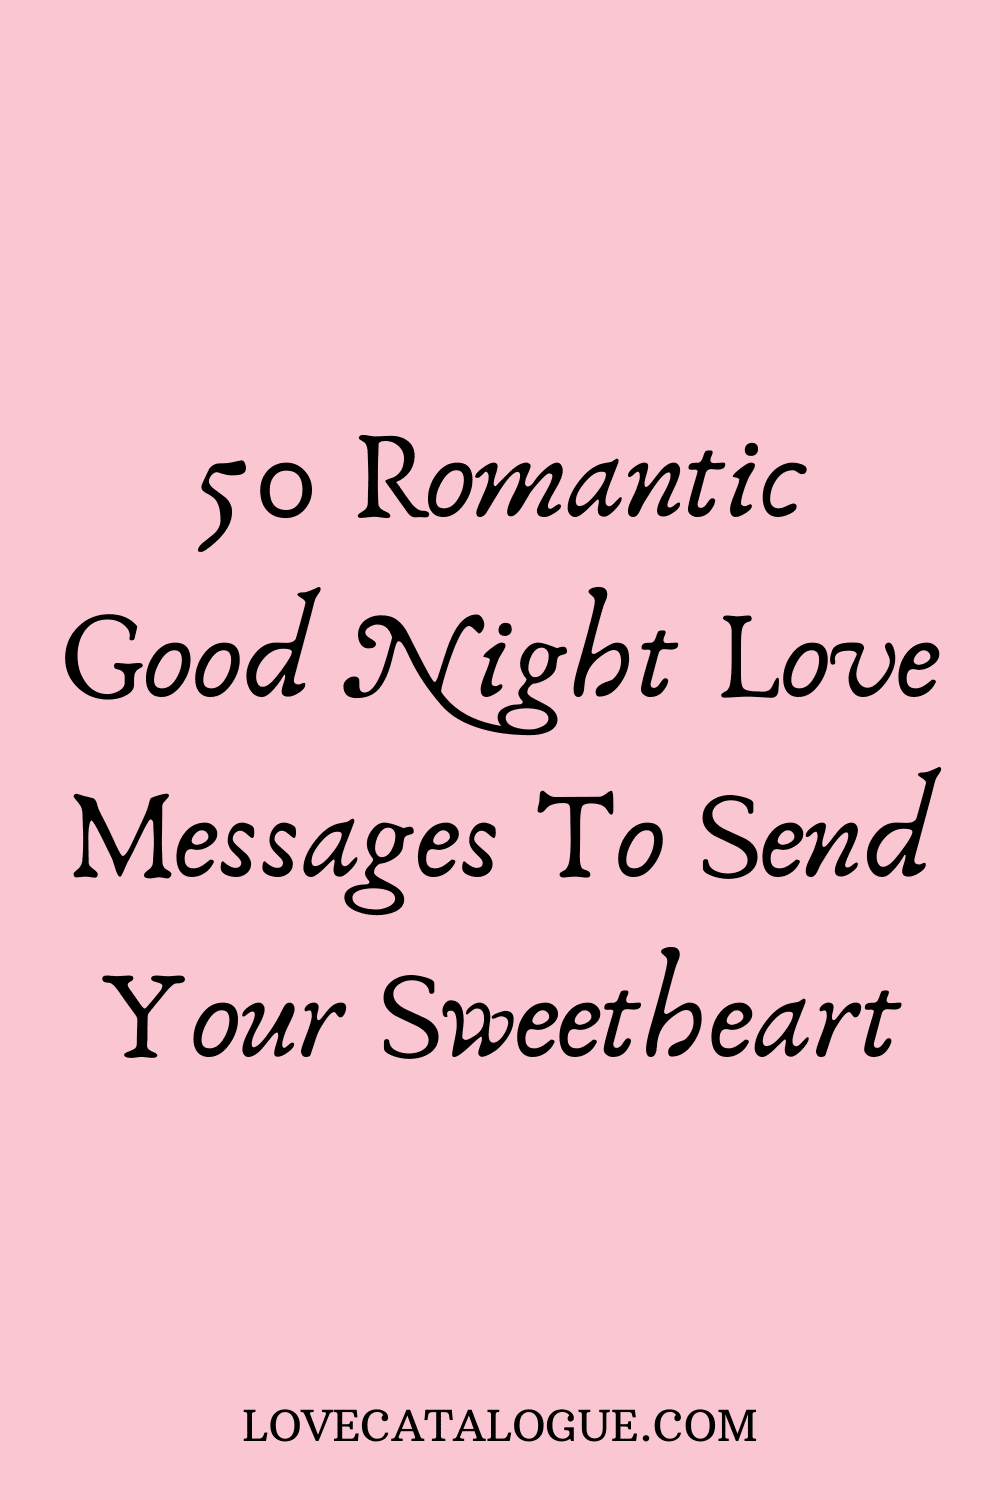 50 Romantic Good Night Love Messages To Send Your Sweetheart